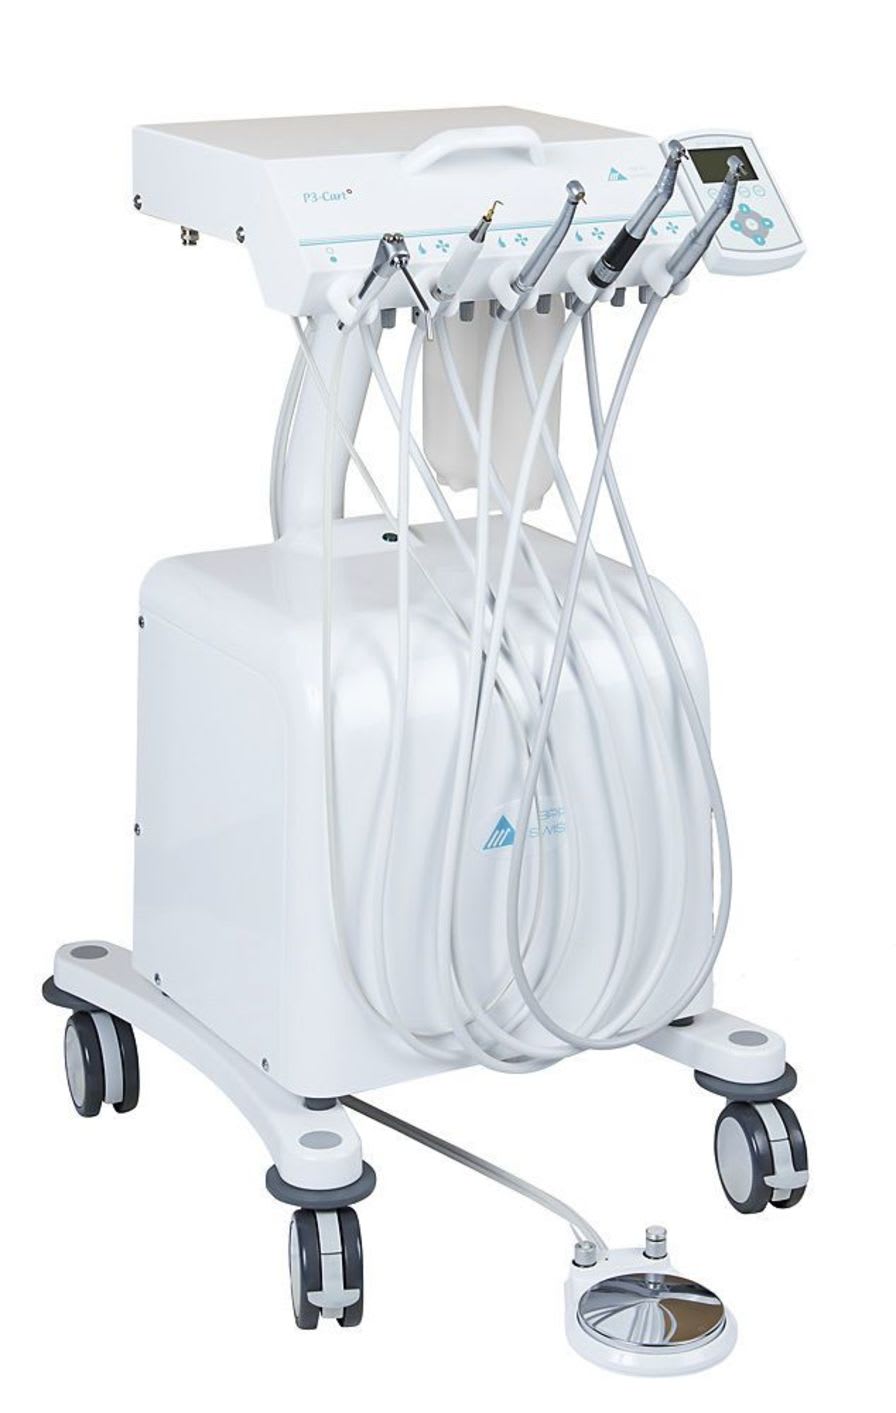 Mobile dental delivery system P3-CART BPR Swiss